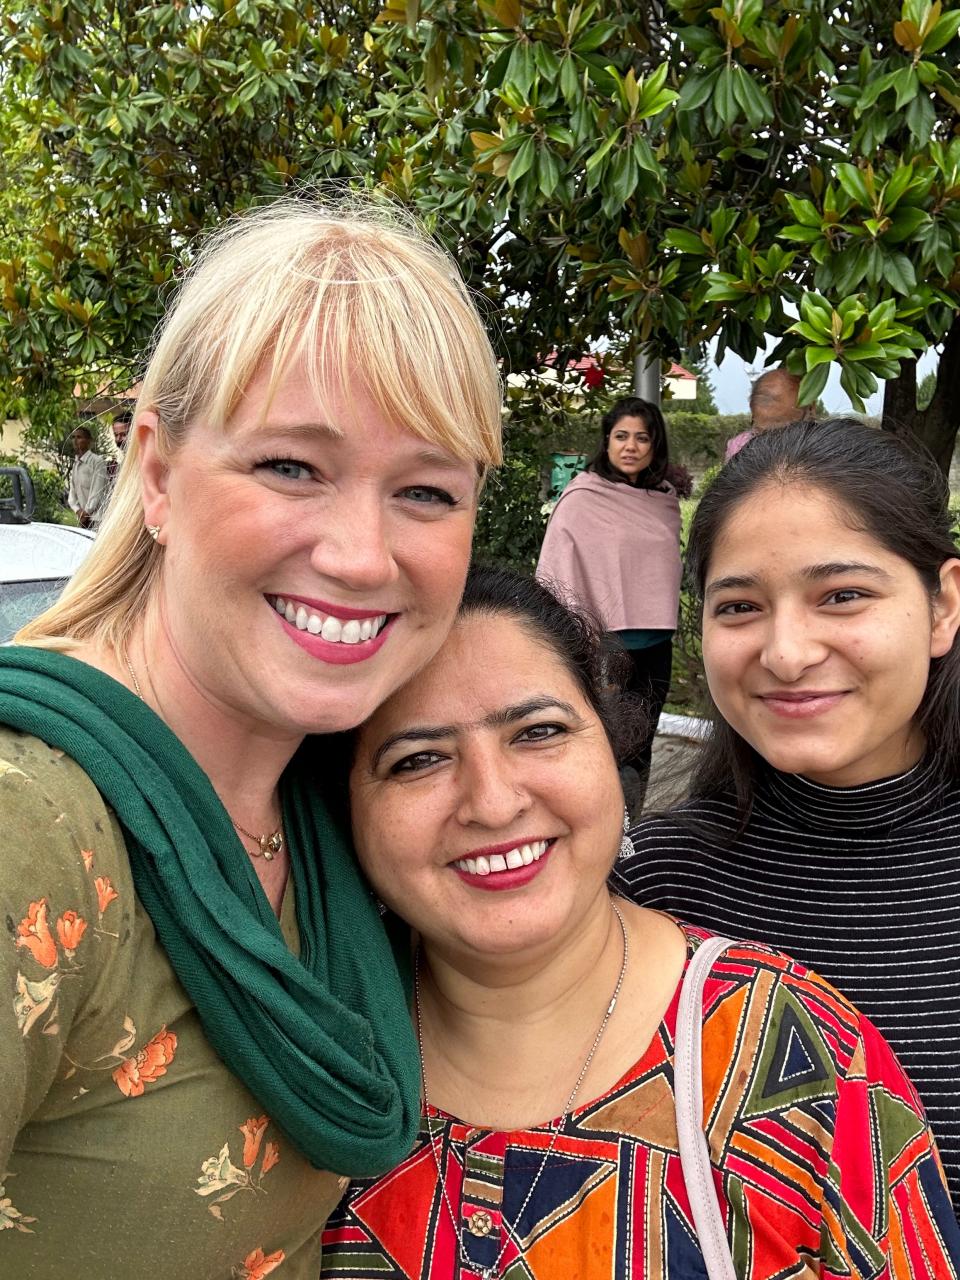 Brittany Curry with Jitender Jeet Kaur, who runs the Women’s Team in Khaniyara, a village near Dharamshala in northern India, and Jitender's neice Anmol Kaur, at the airport in India, 2023.